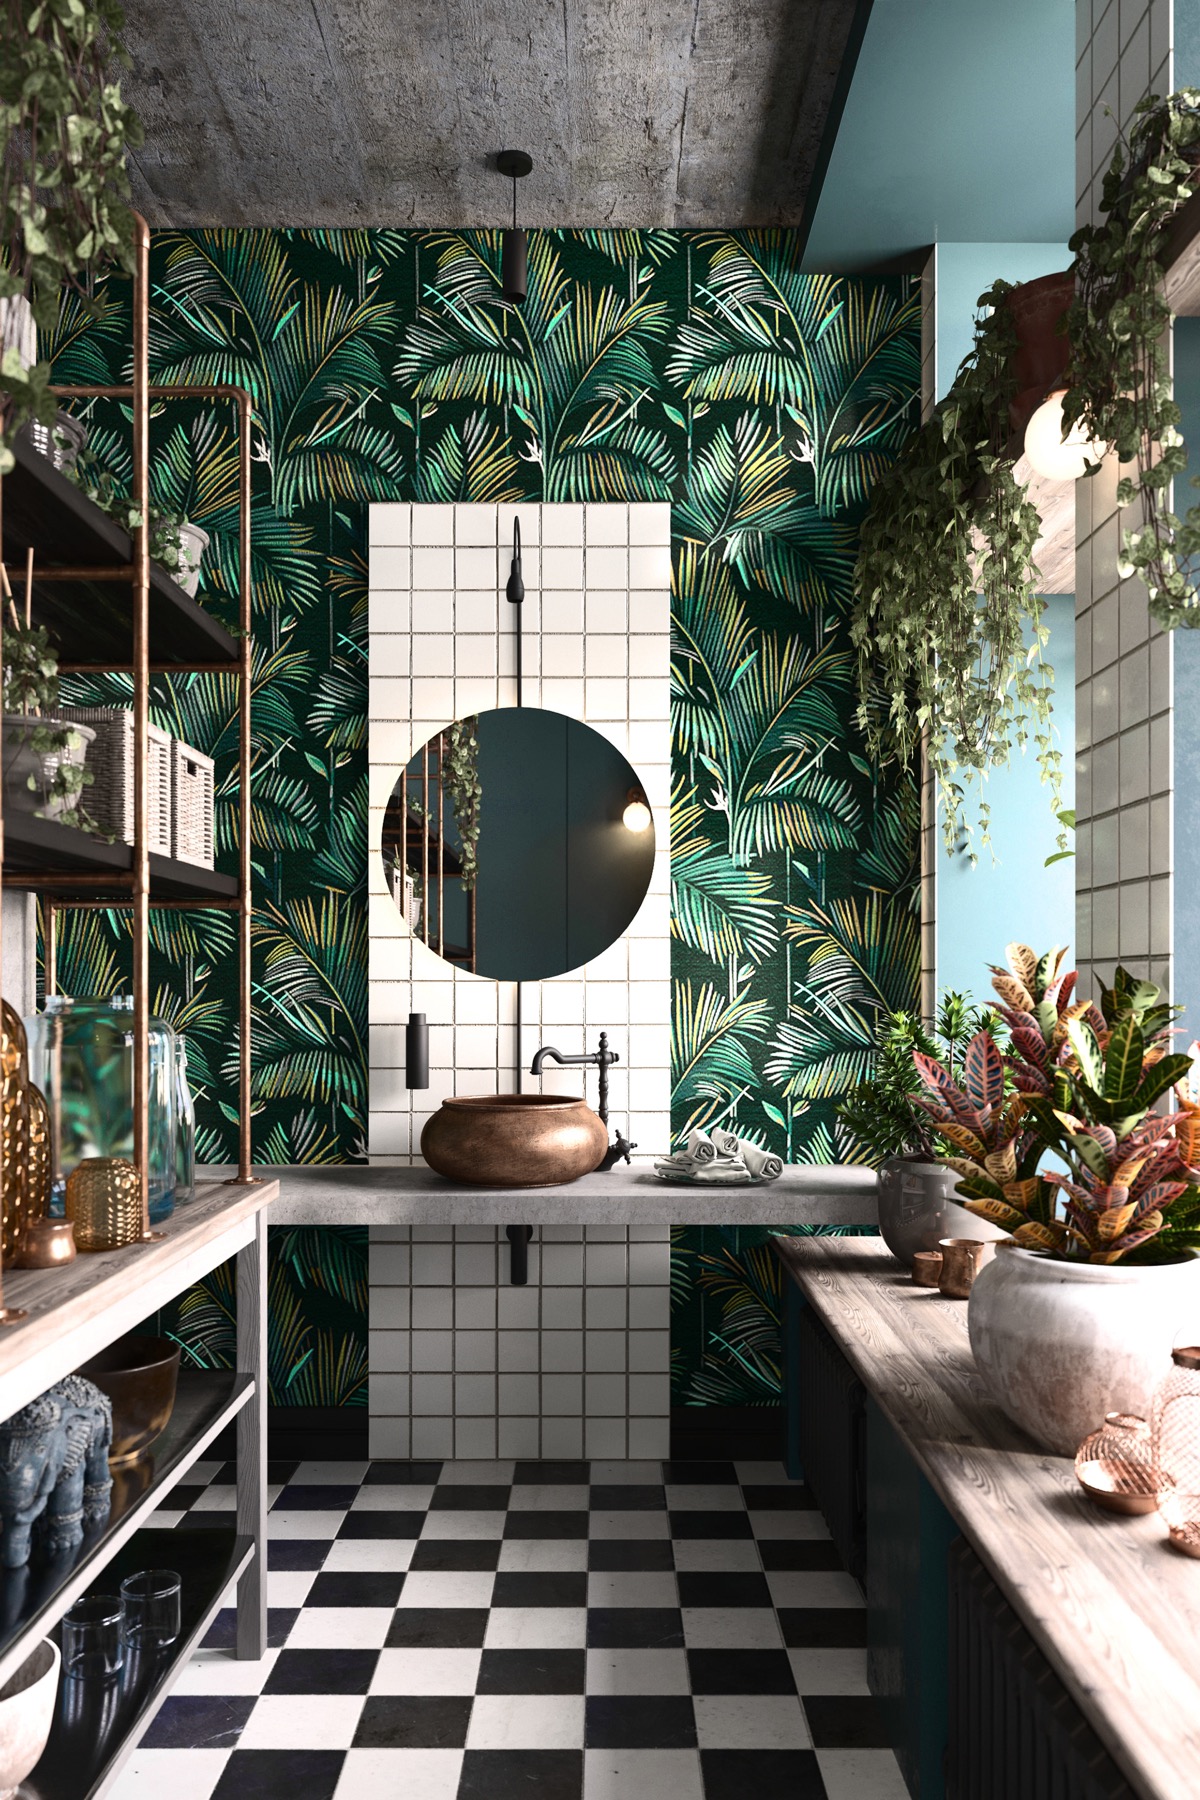 Botanical wallpaper builds a natural theme with or without indoor plants. Add gold, brass, or bronze accents to add a rich and regal air to the space.